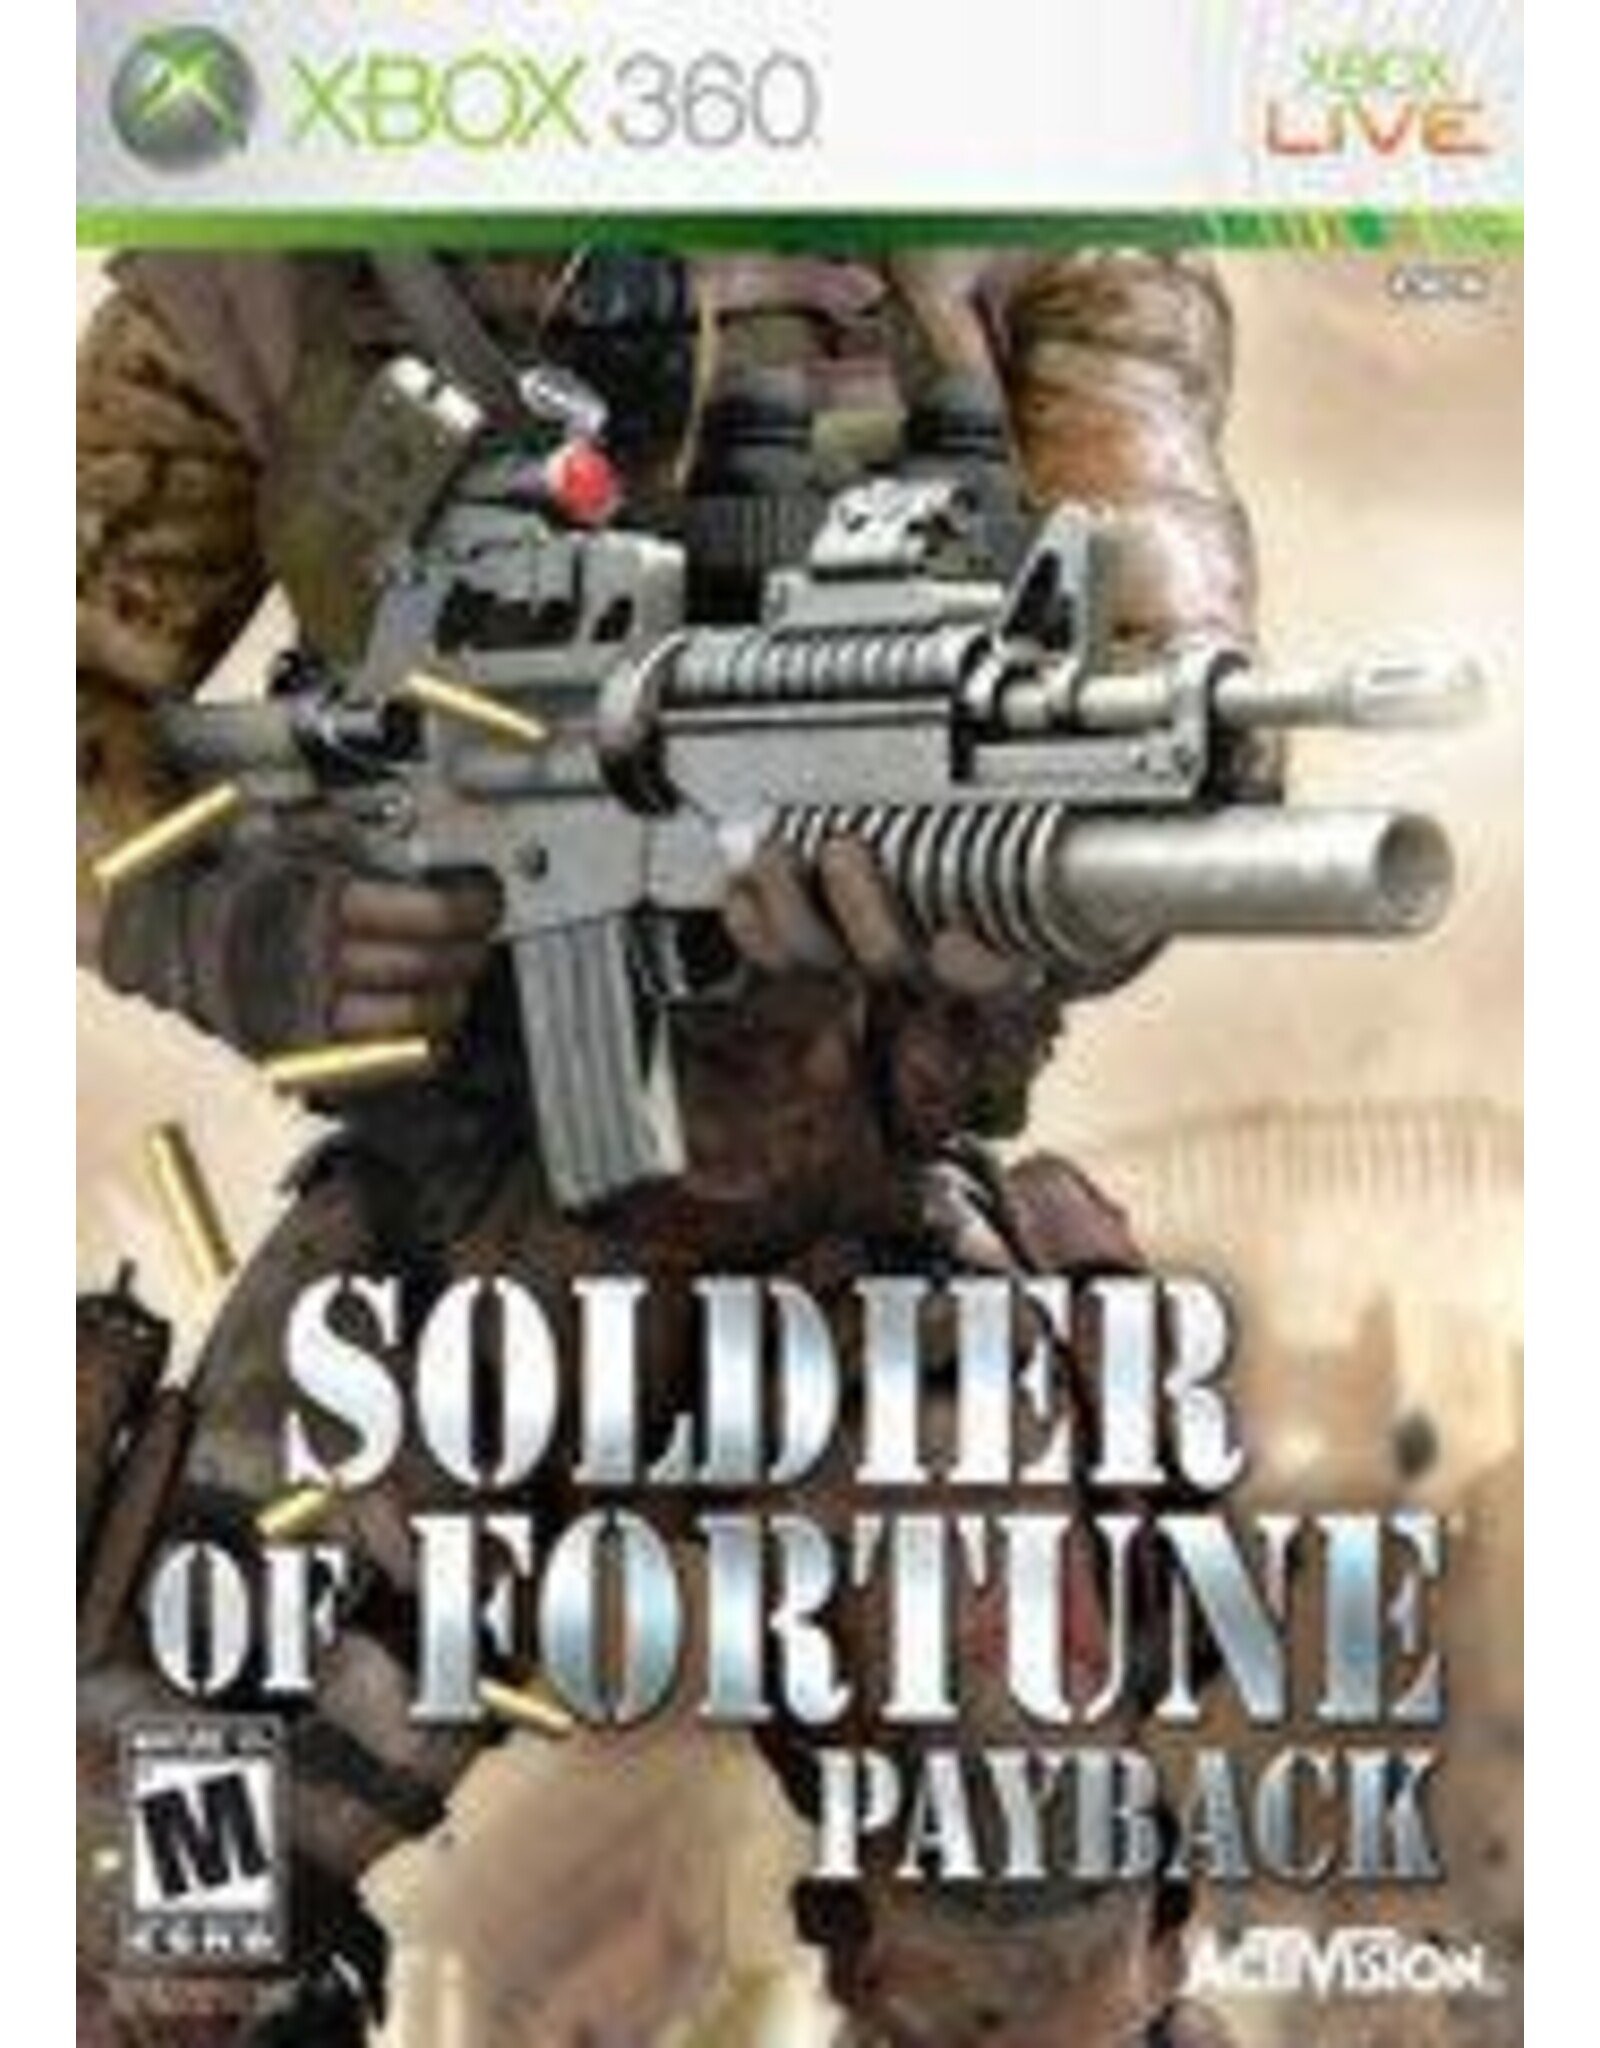 Xbox 360 Soldier Of Fortune Payback (No Manual, Damaged Sleeve)